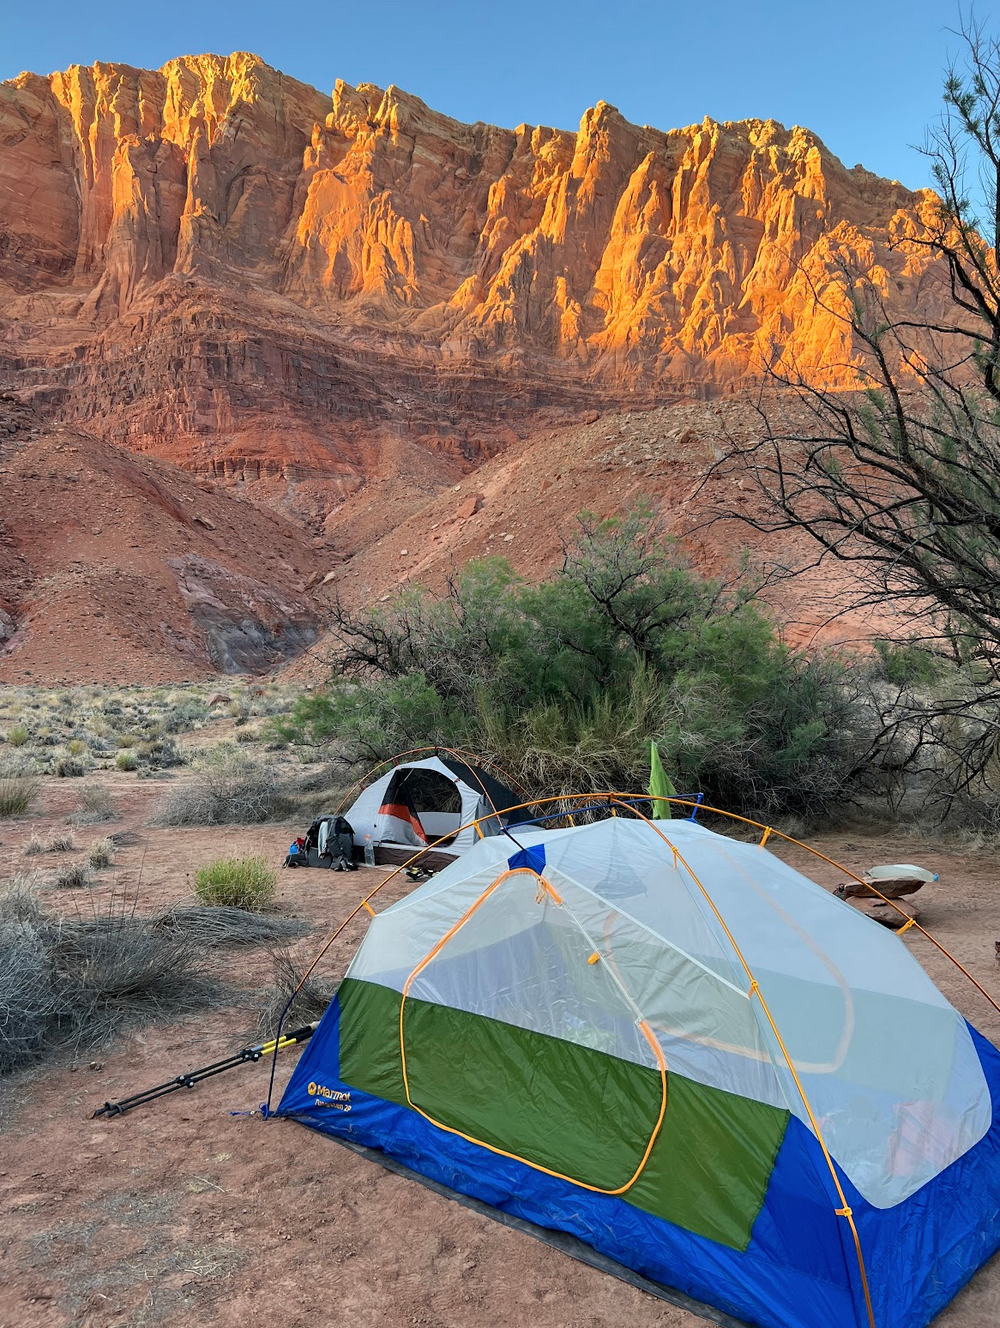 Camper submitted image from Paria Canyon Wilderness - Final Designated Campsite Before Lee's Ferry - 5